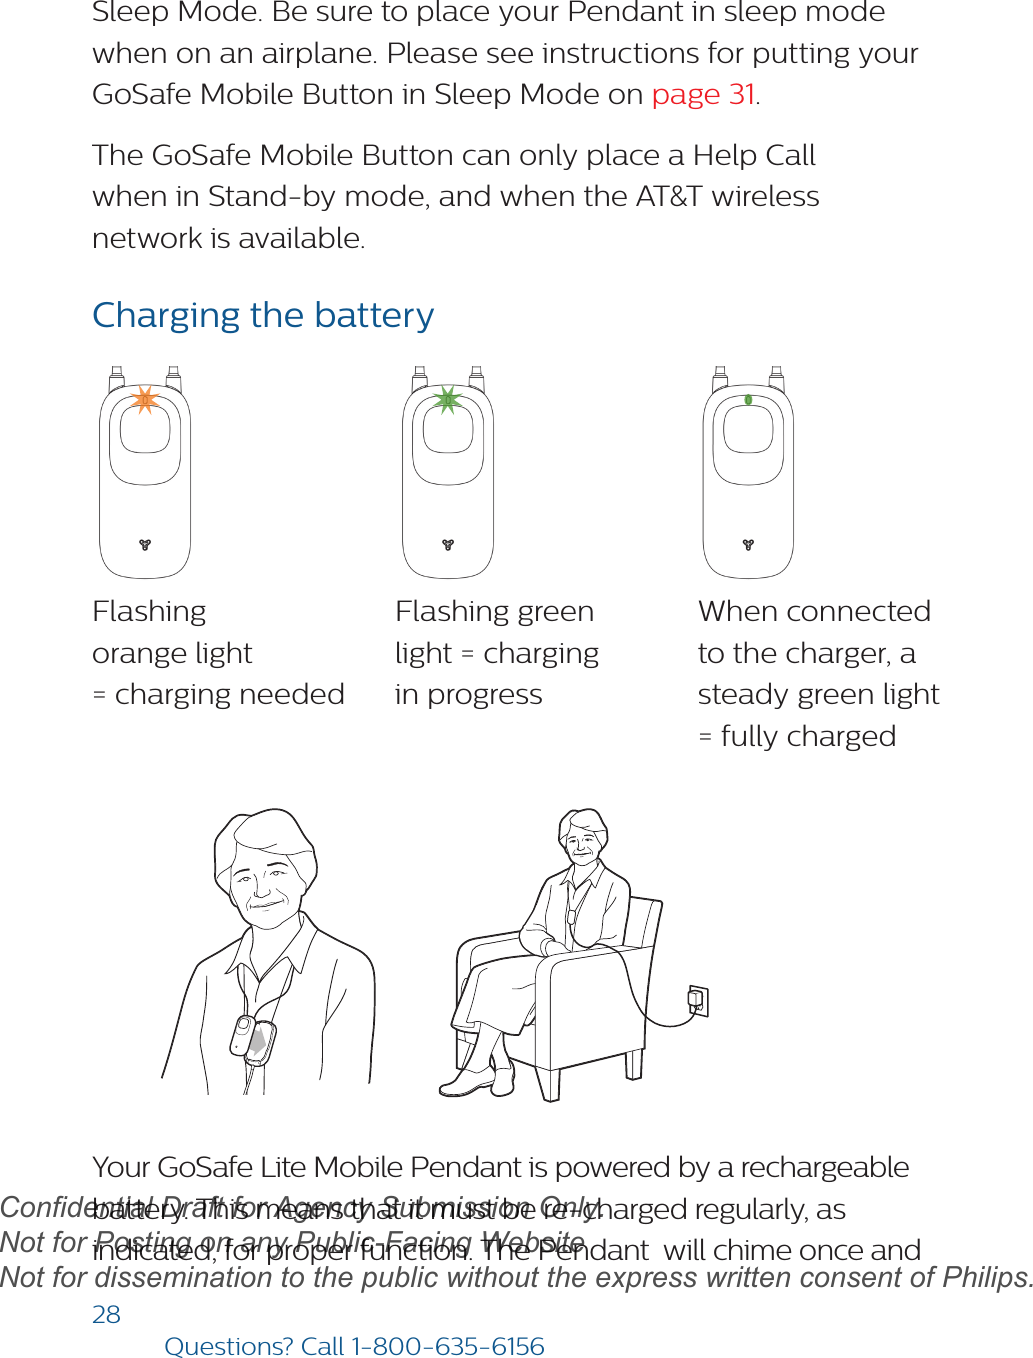 28Questions? Call1-800-635-6156Sleep Mode. Be sure to place your Pendant in sleep mode when on an airplane. Please see instructions for putting your GoSafe Mobile Button in Sleep Mode on page 31.The GoSafe Mobile Button can only place a Help Call when in Stand-by mode, and when the AT&amp;T wireless network is available.Charging the batteryYour GoSafe Lite Mobile Pendant is powered by a rechargeable battery. This means that it must be re-charged regularly, as indicated, for proper function. The Pendant  will chime once and Flashing  orange light  = charging neededFlashing green  light = charging in progressWhen connected  to the charger, a steady green light = fully chargeddraftConfidential Draft for Agency Submission Only.   Not for Posting on any Public-Facing Website Not for dissemination to the public without the express written consent of Philips.